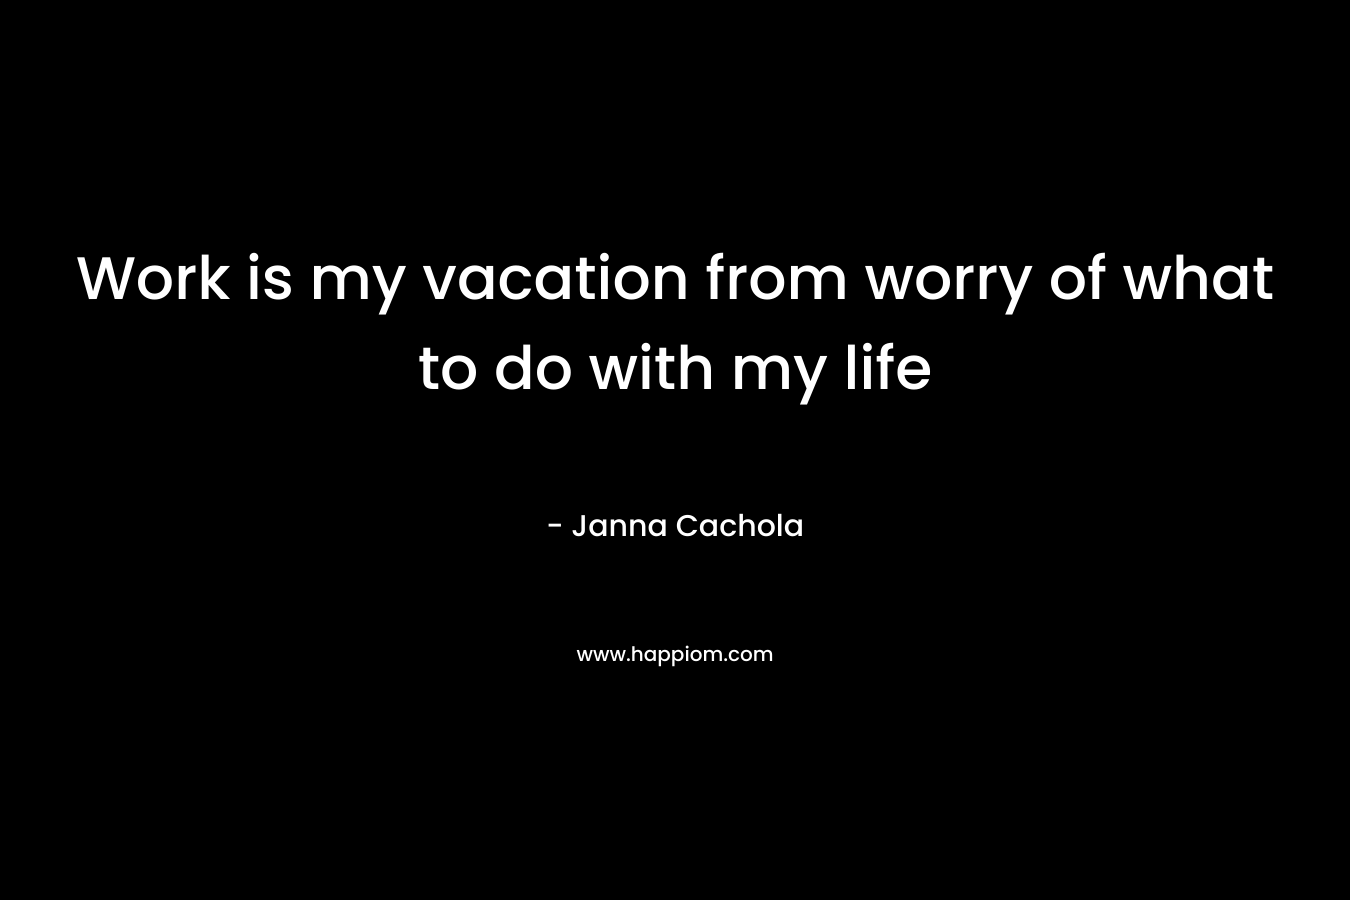 Work is my vacation from worry of what to do with my life